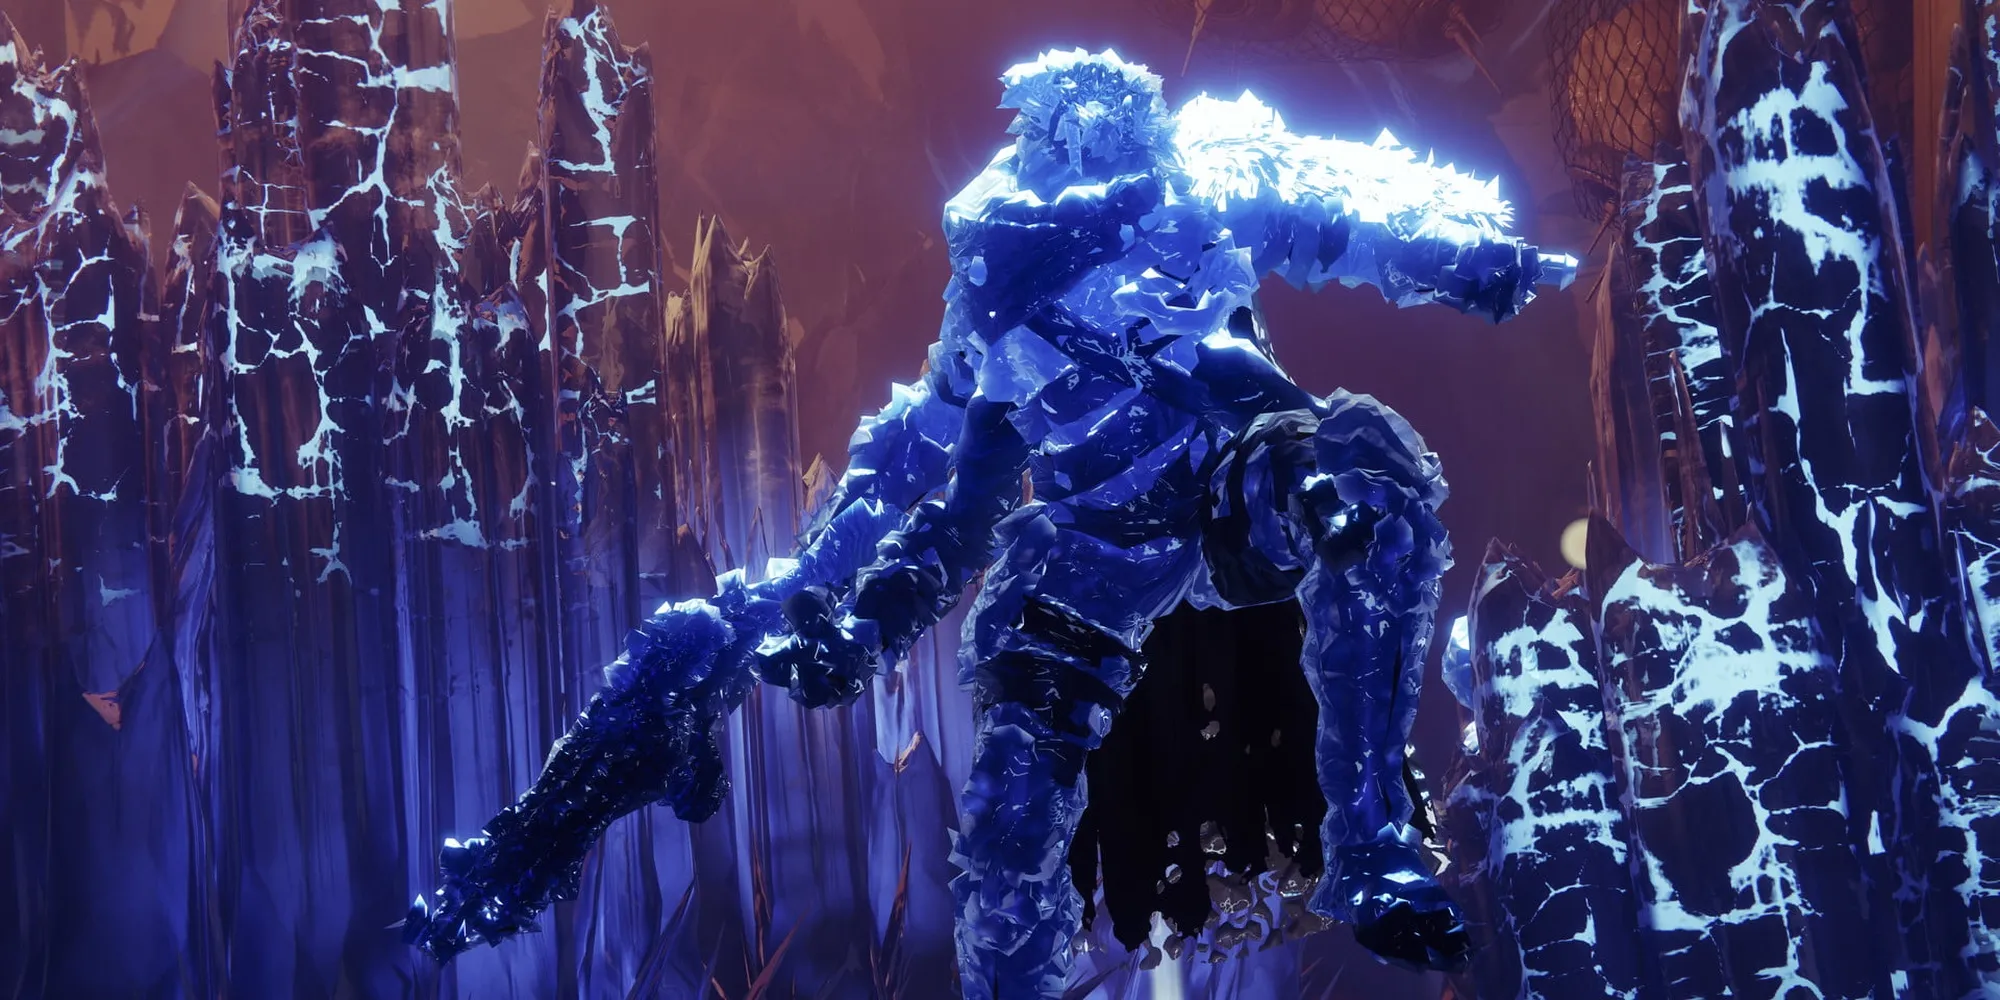 Destiny 2 Fallen Frozen In Stasis And Surrounded By Crystals